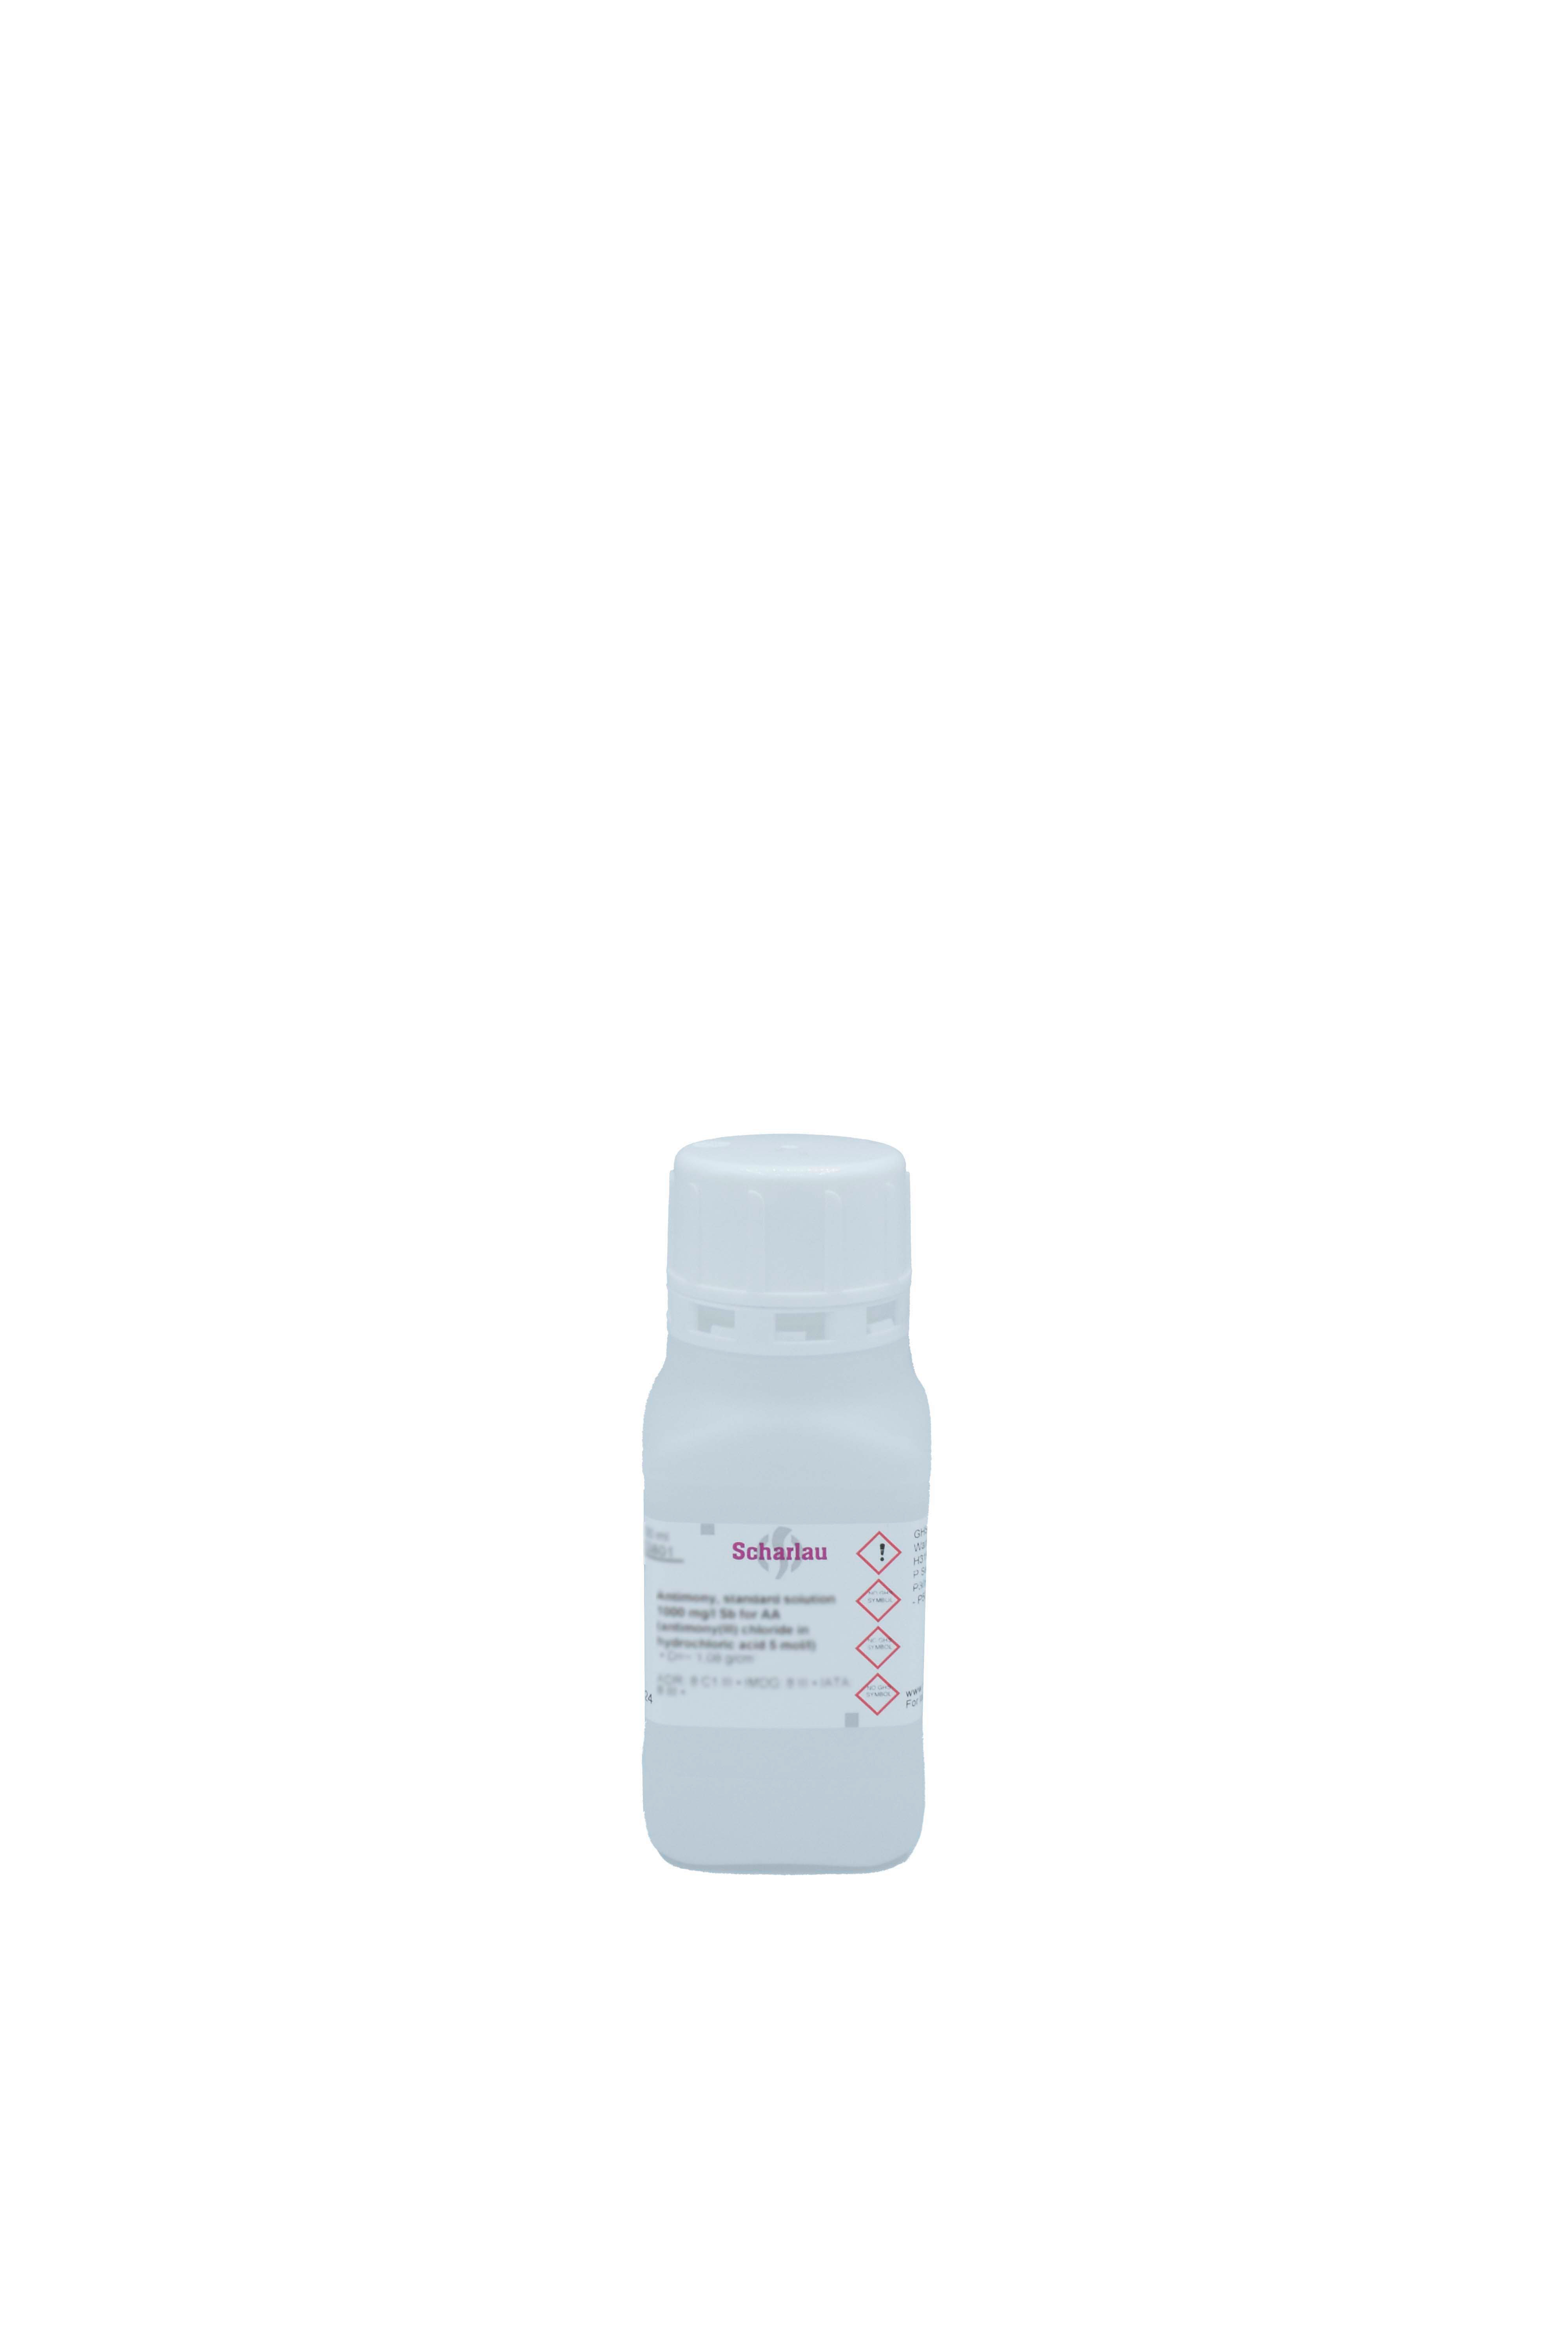 Arsenic, standard solution 1000 mg/l As for AAsS (arsenic(III) oxide in HNO3 0,5 mol/l)